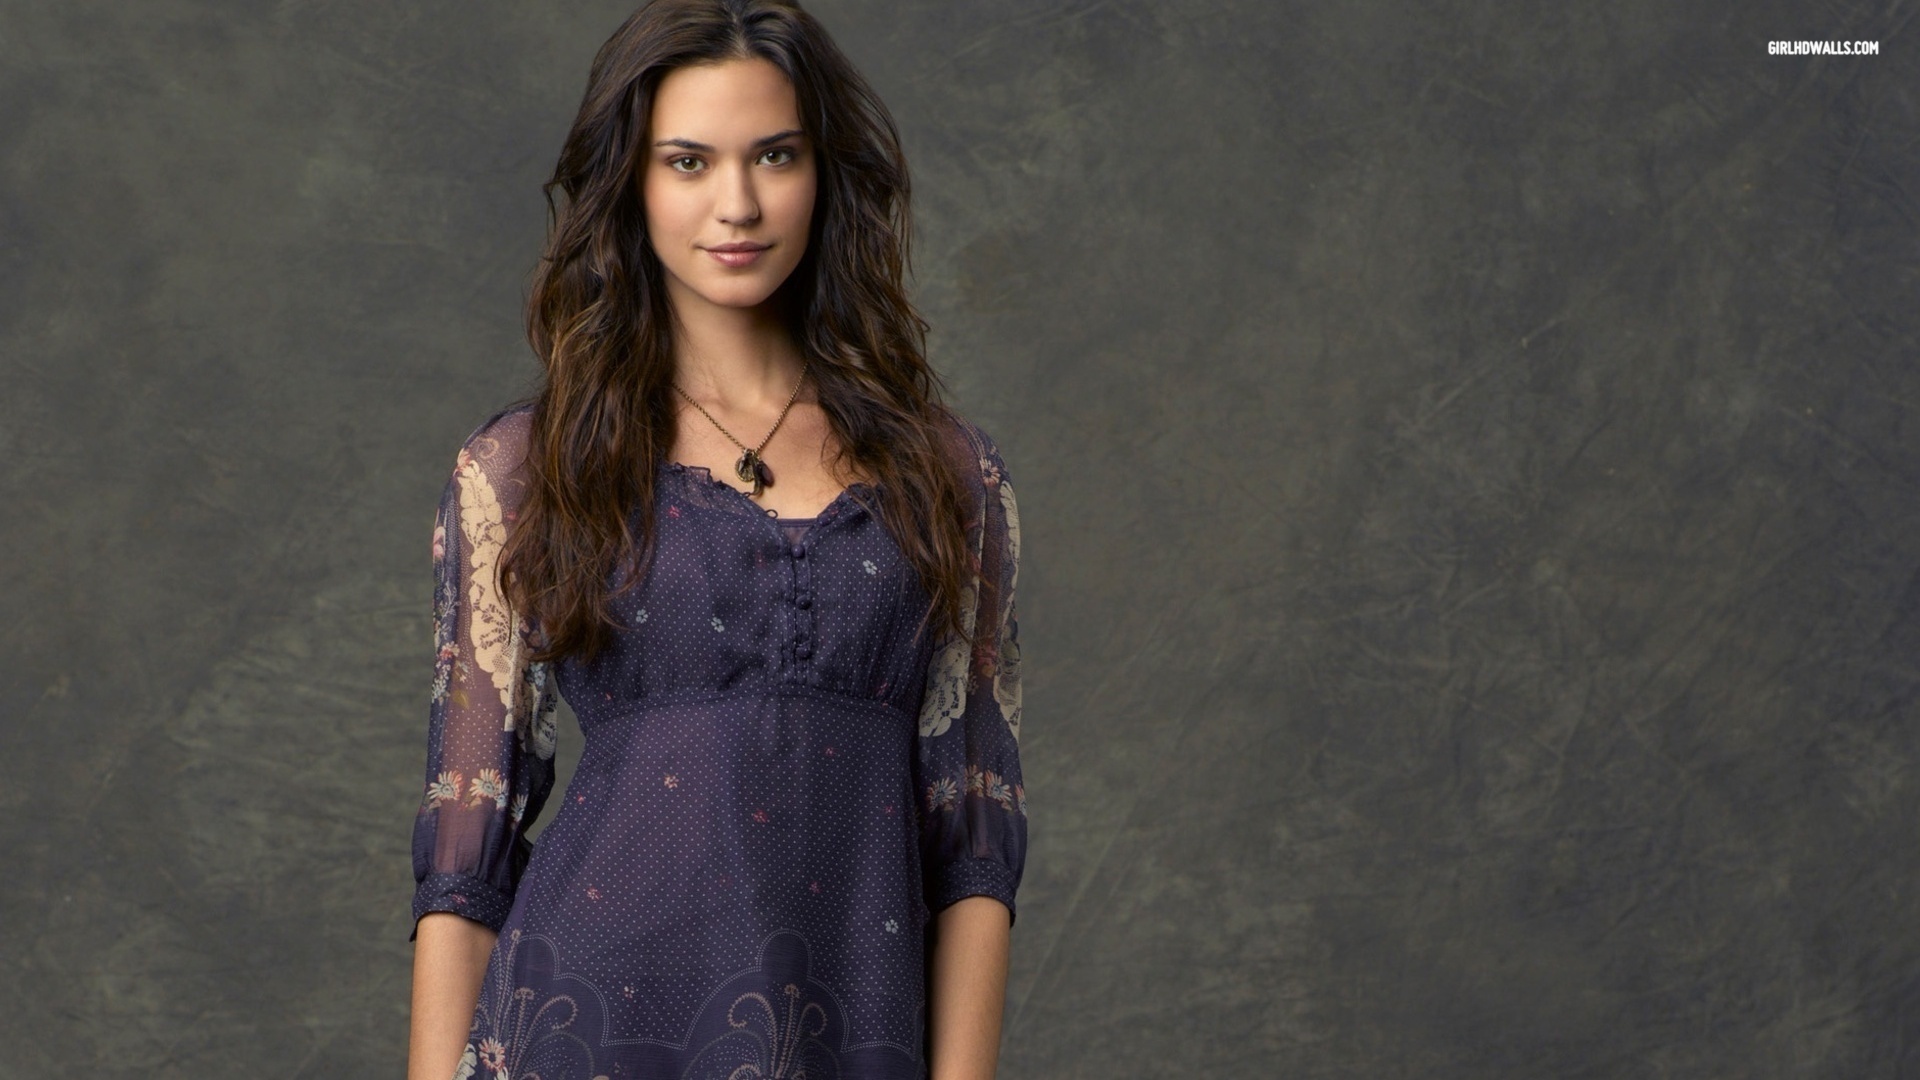 Odette Annable Wallpaper High Resolution And Quality